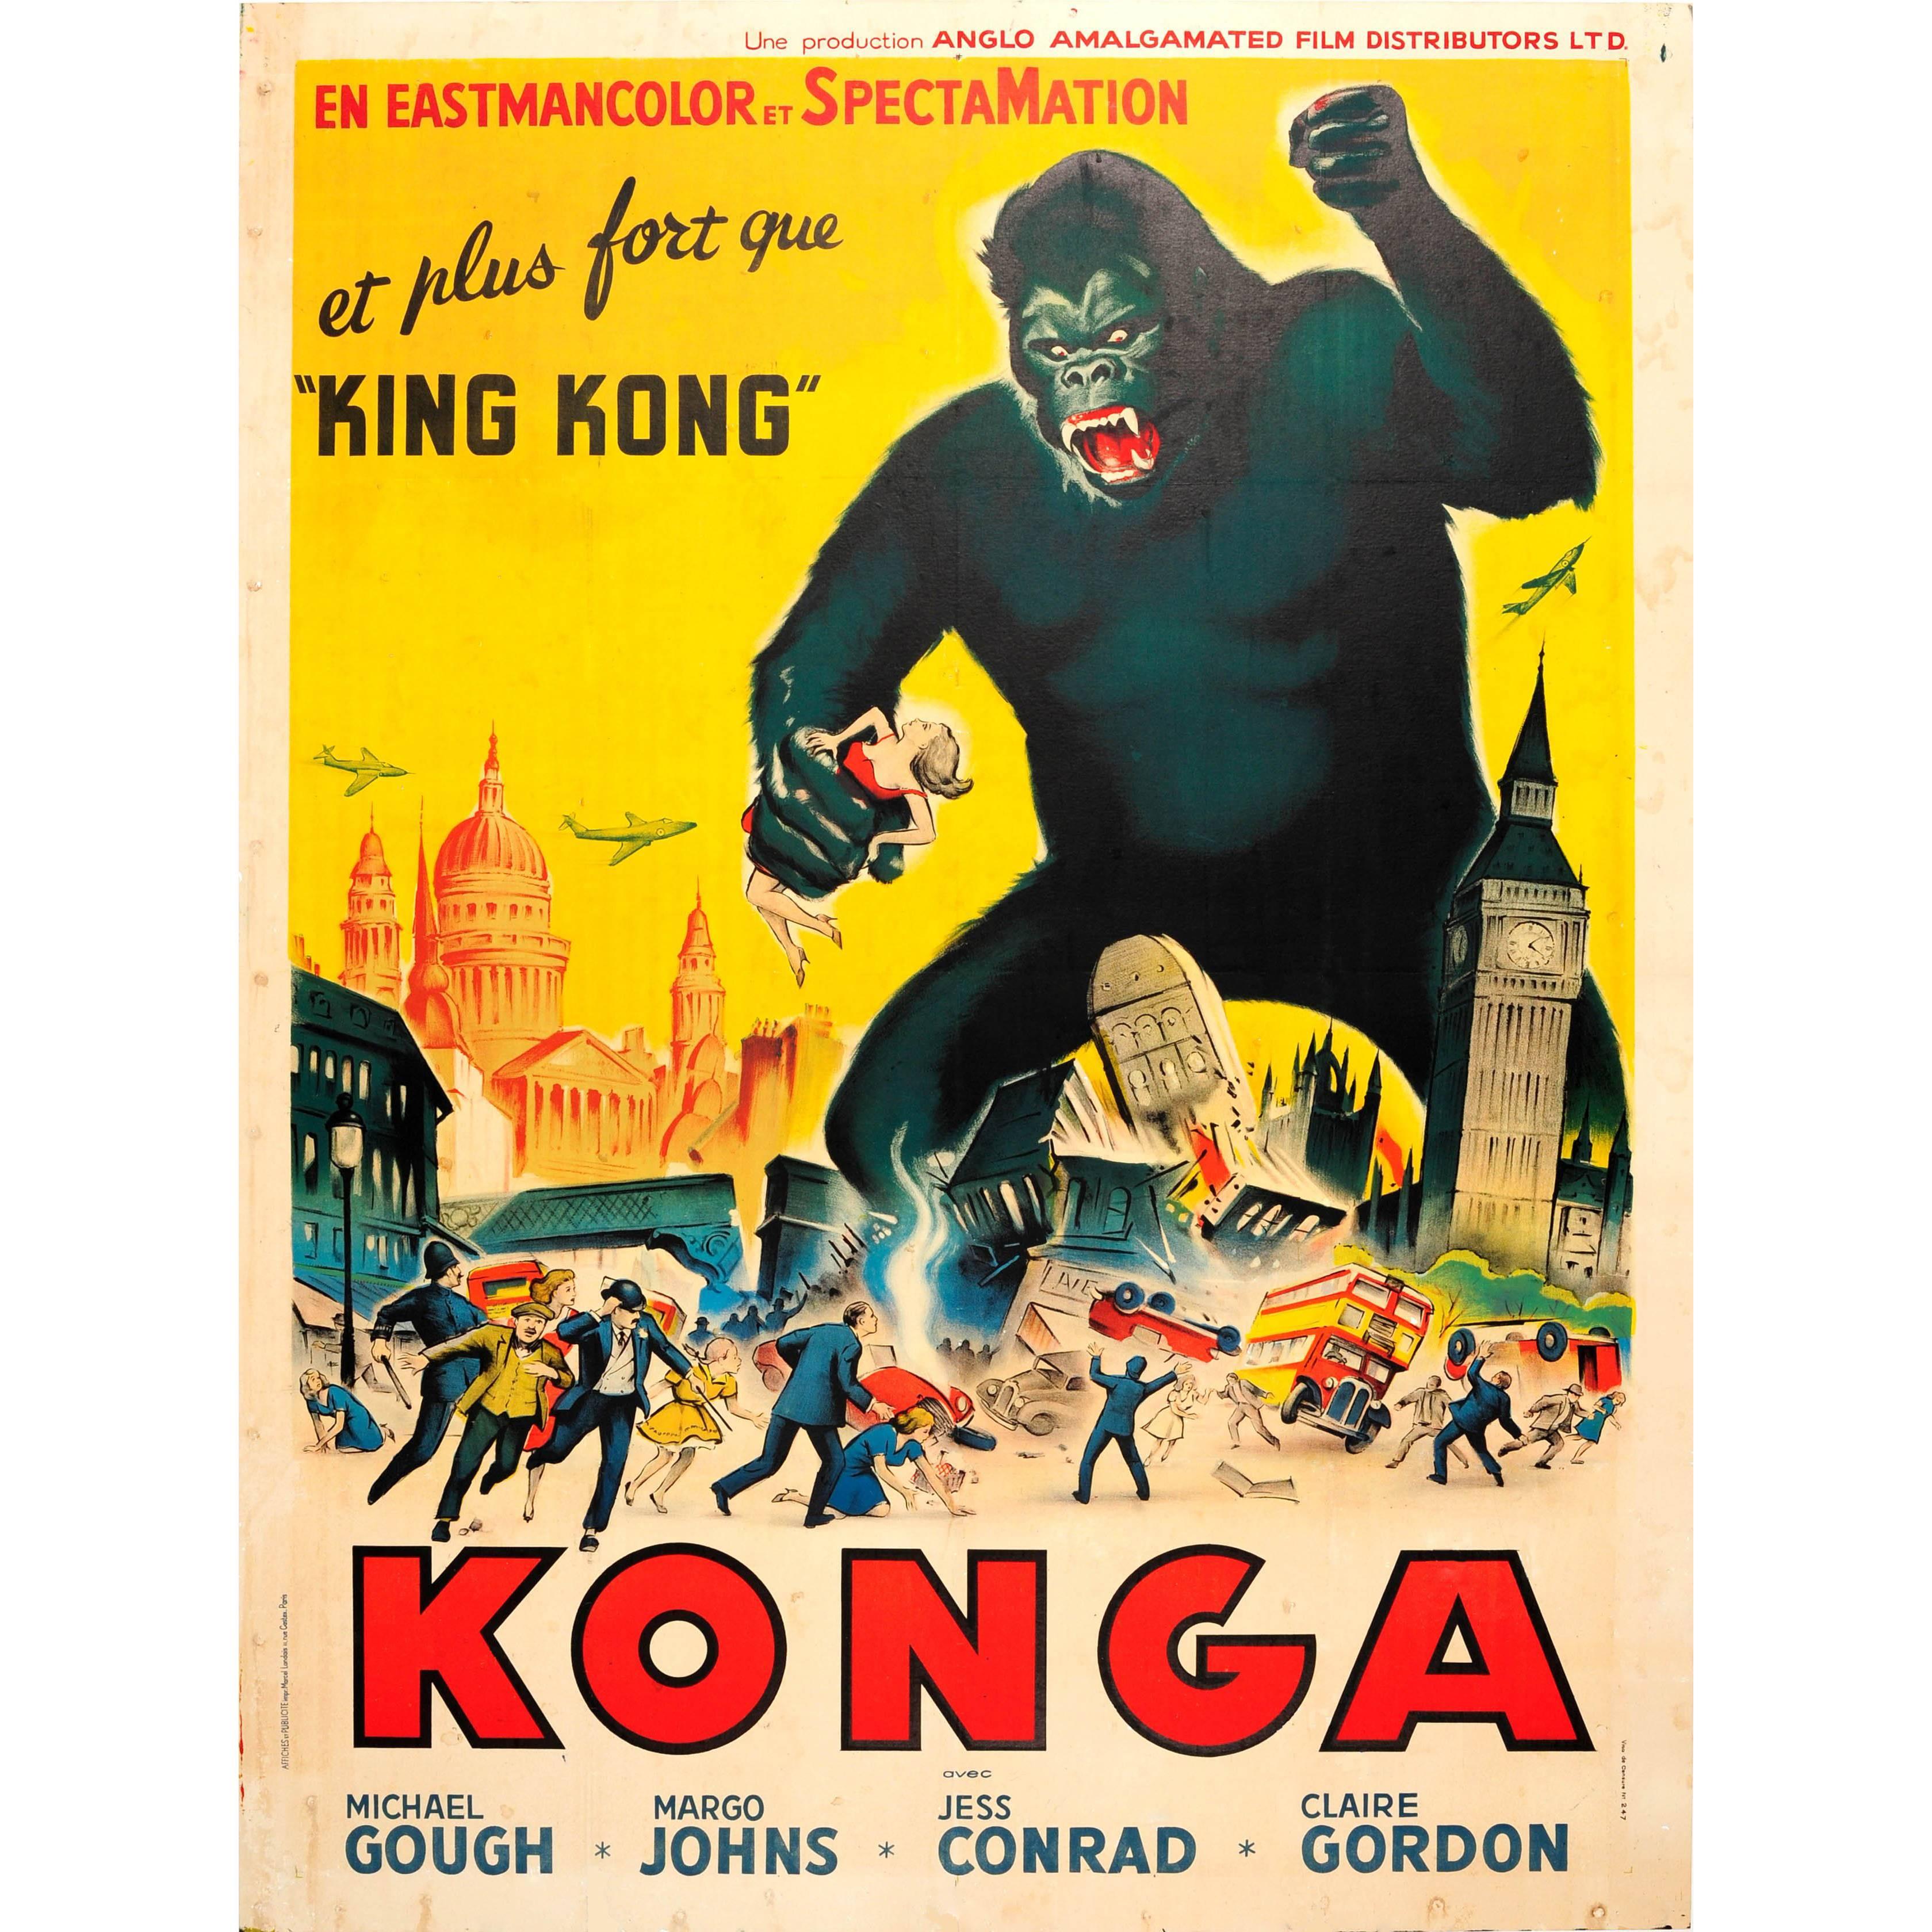 Large Original Vintage Movie Poster for the Science Fiction Horror Film Konga